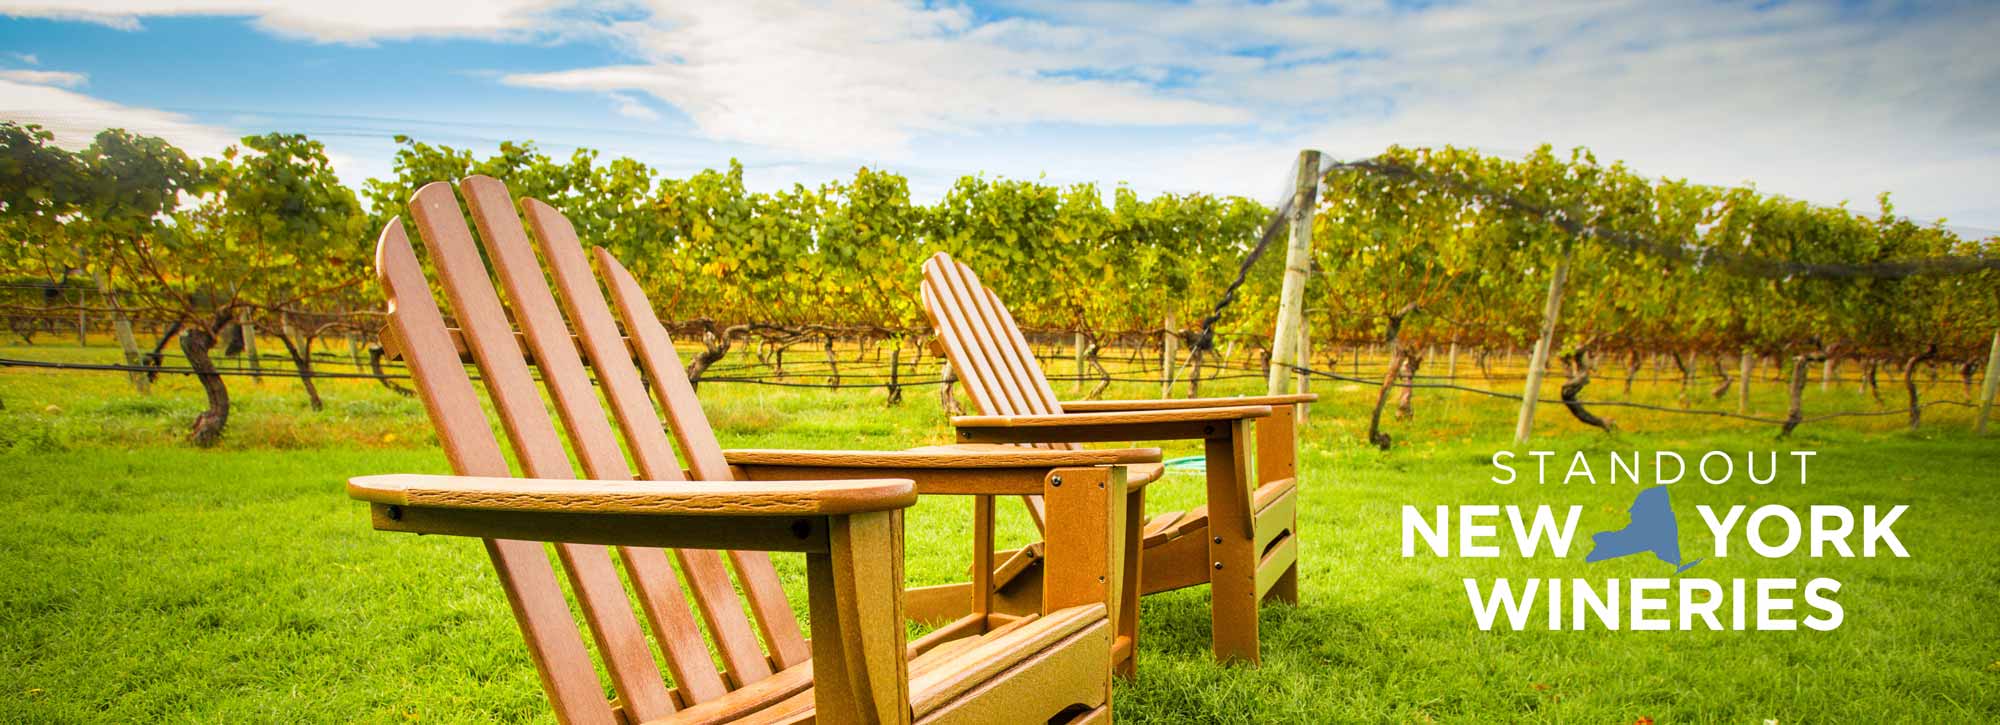 Standout NY Wineries